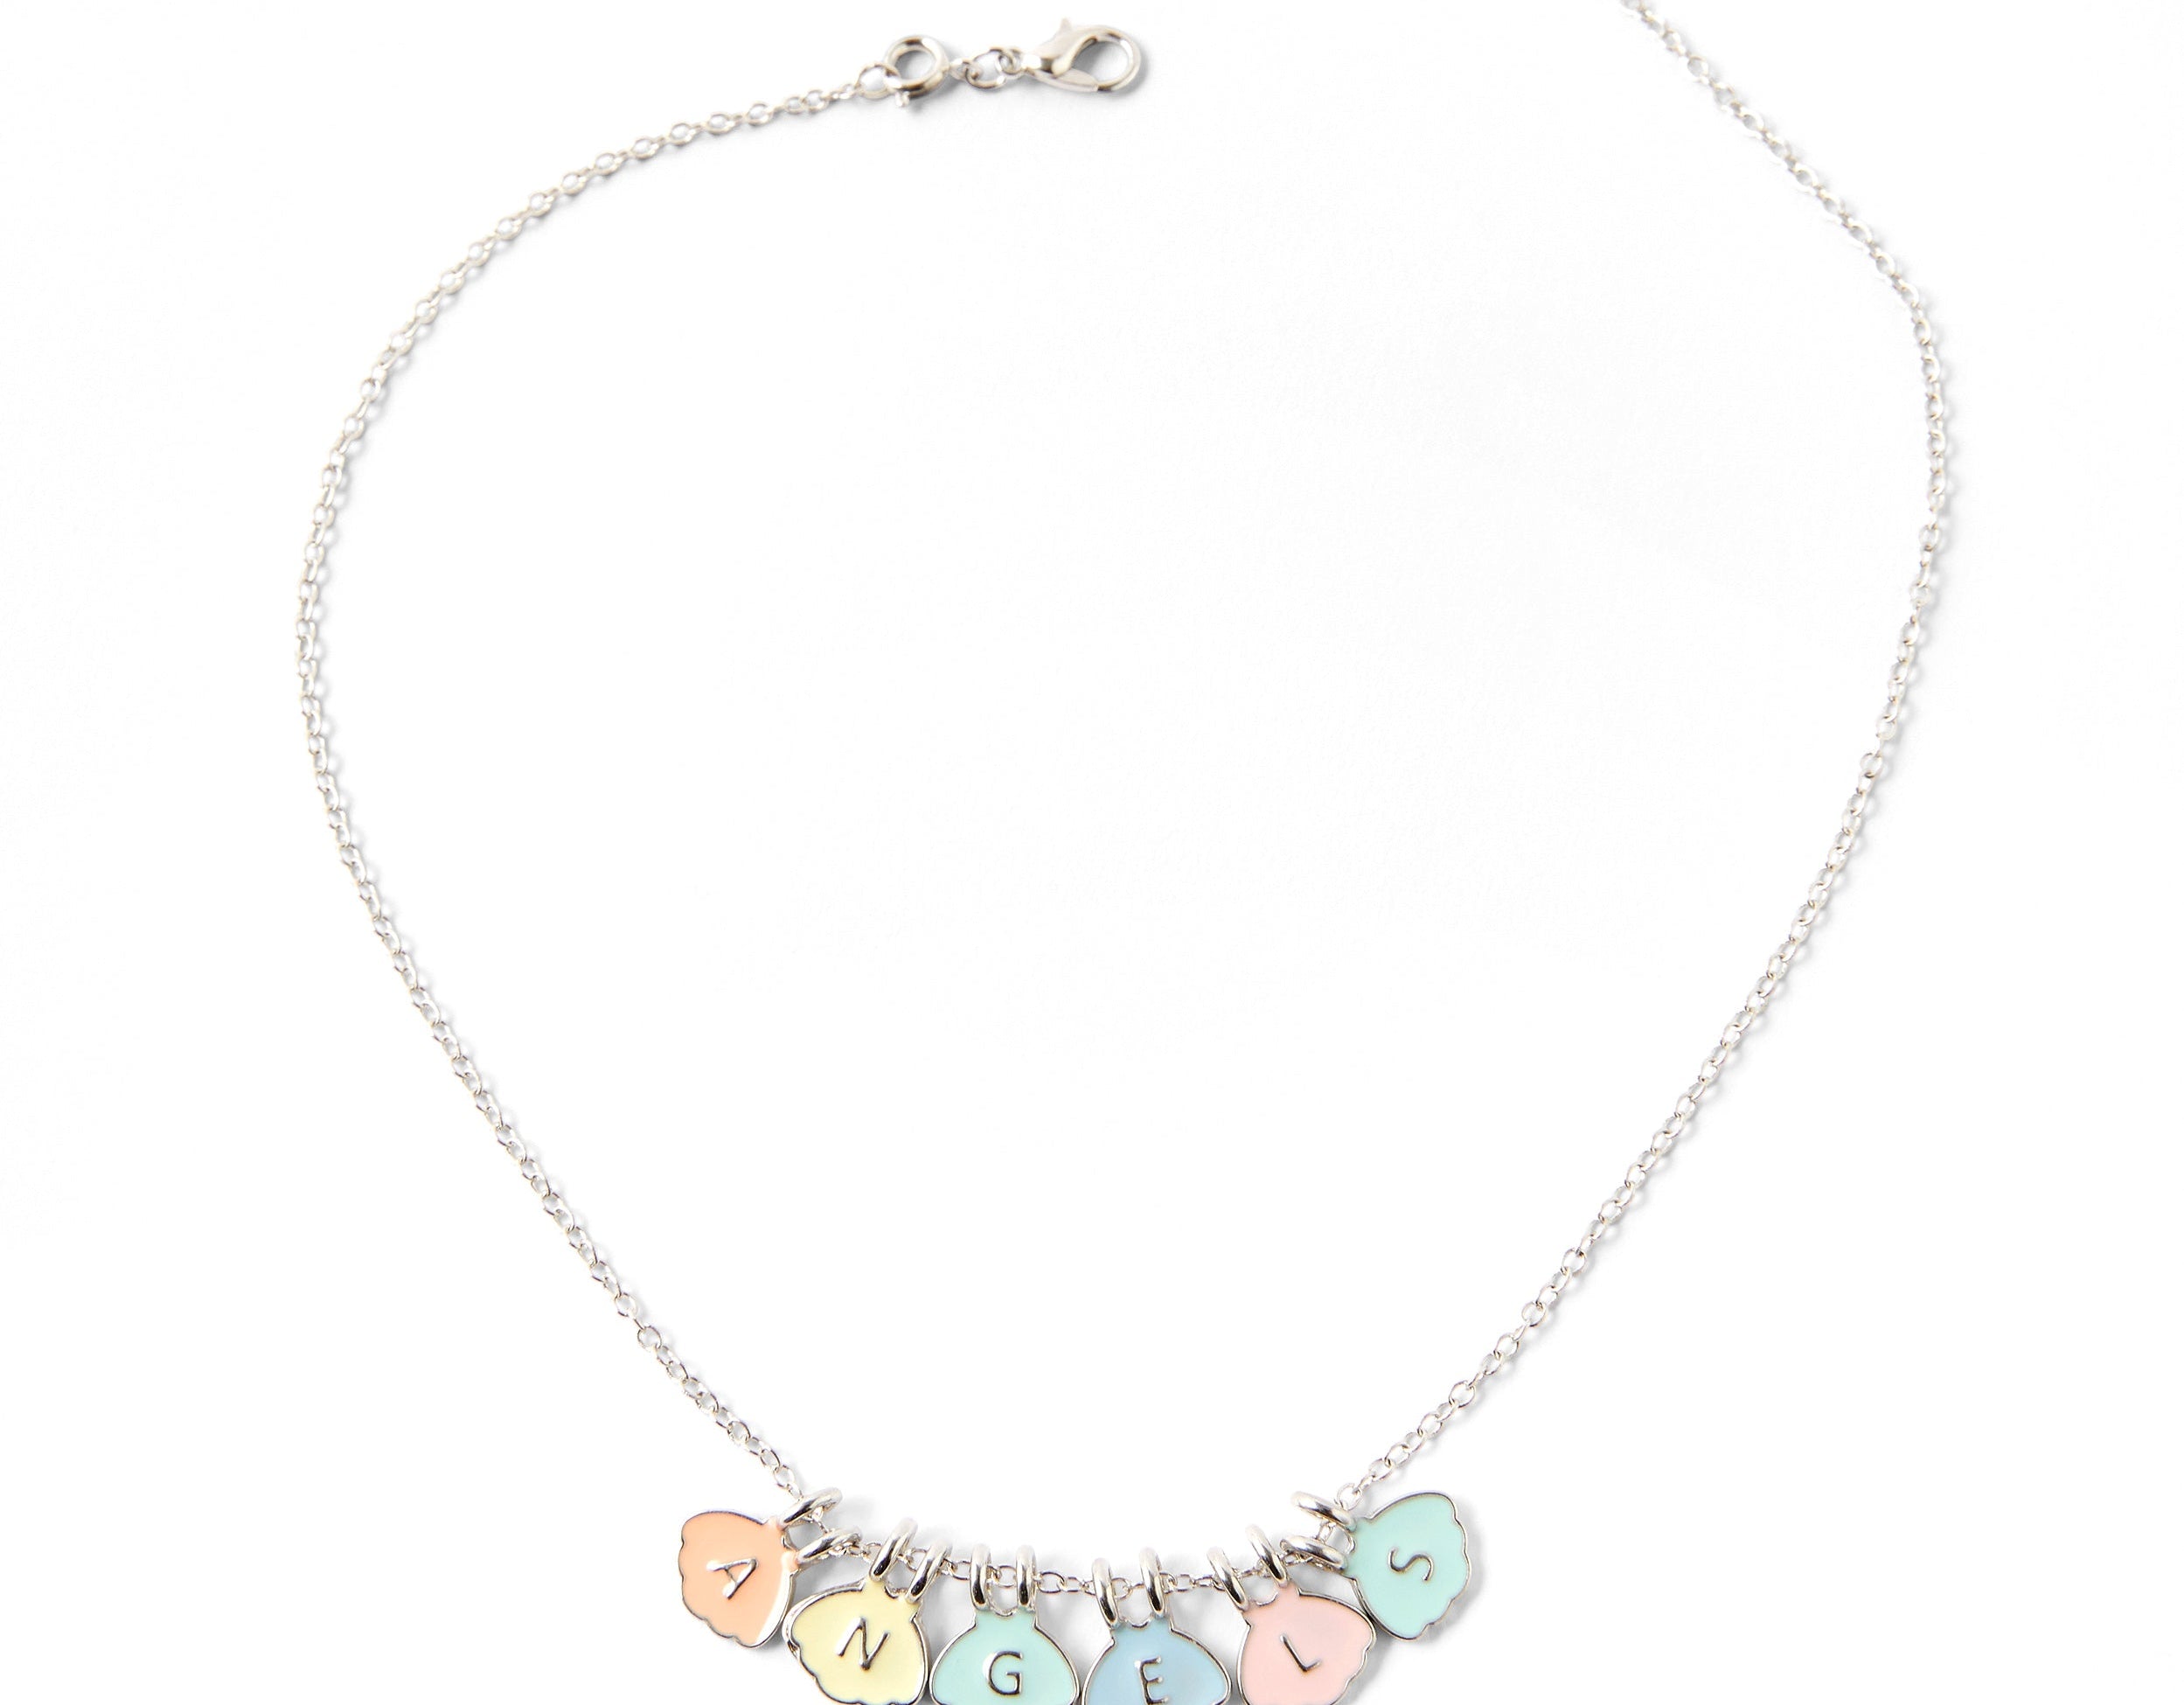 Accessorize London Make Your Own Shell Charm Necklace